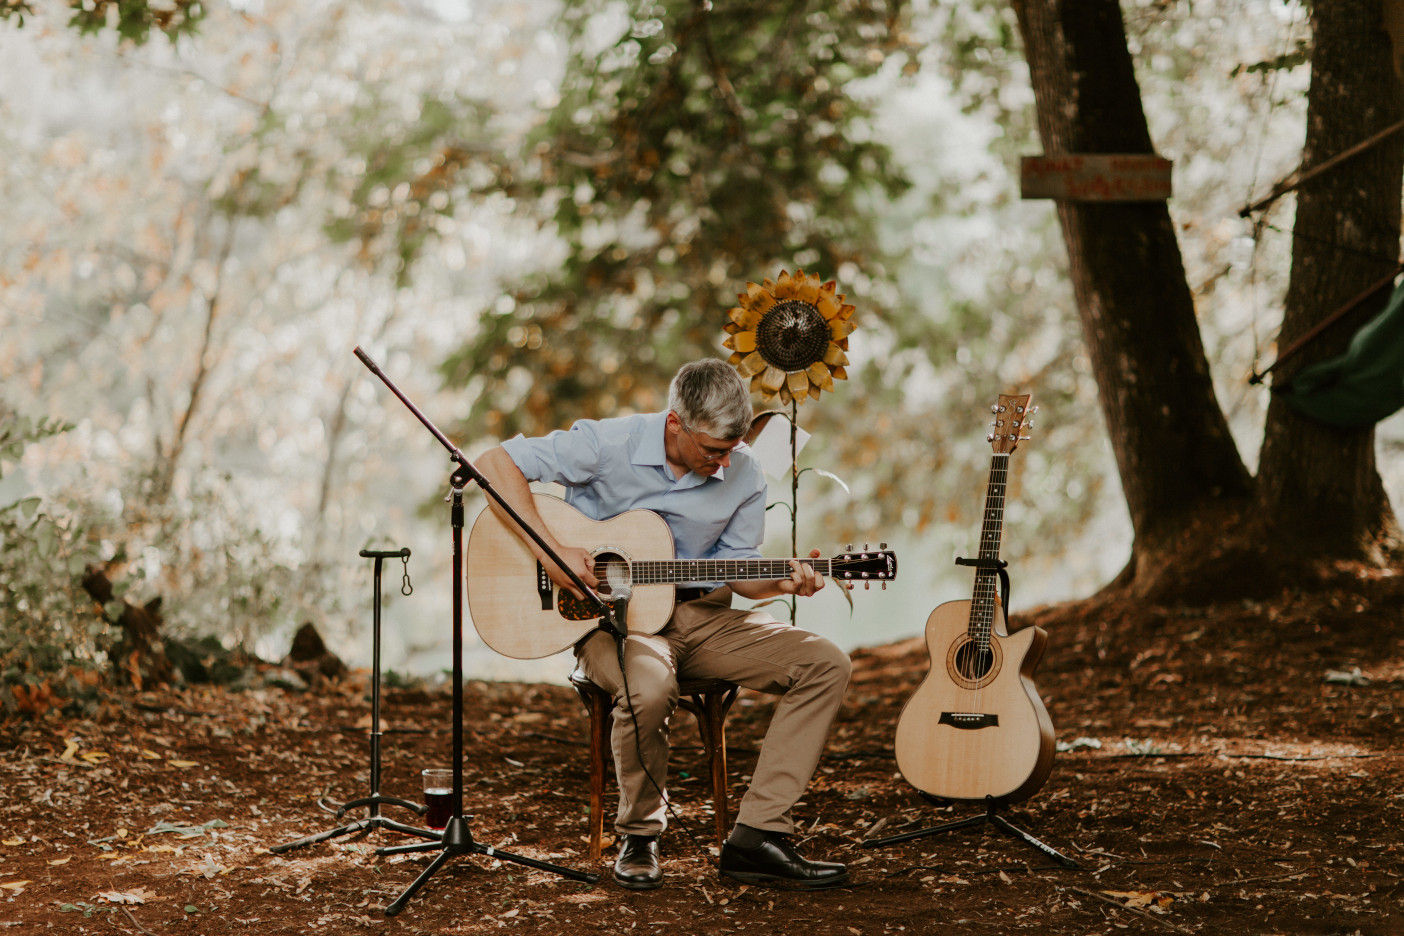 A guitarist plays music for guests in Corvallis, Oregon. Intimate wedding photography in Corvallis Oregon by Sienna Plus Josh.